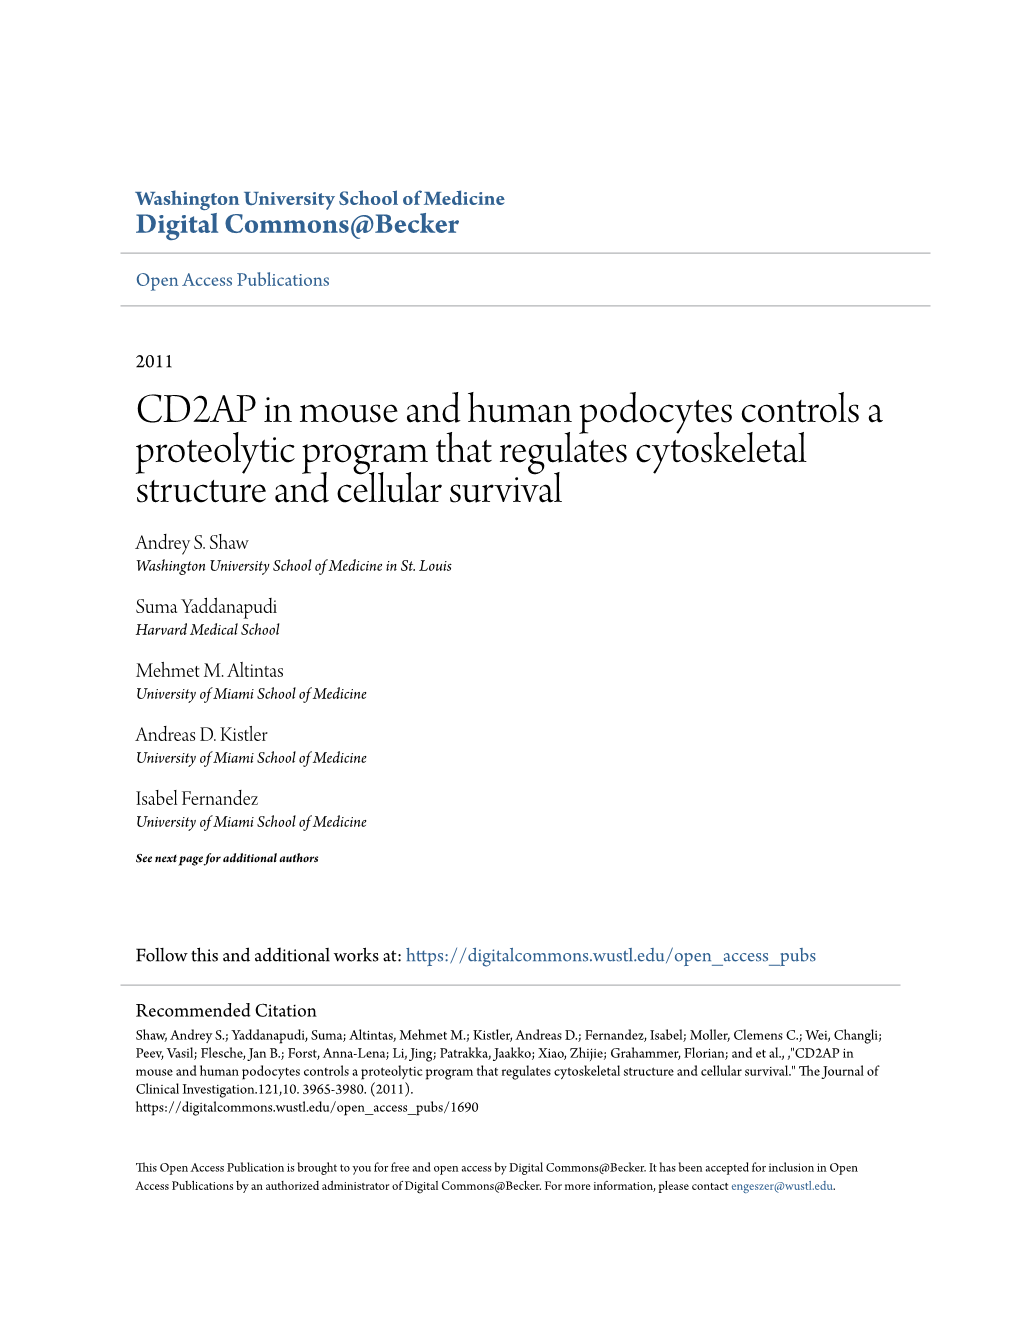 CD2AP in Mouse and Human Podocytes Controls a Proteolytic Program That Regulates Cytoskeletal Structure and Cellular Survival Andrey S